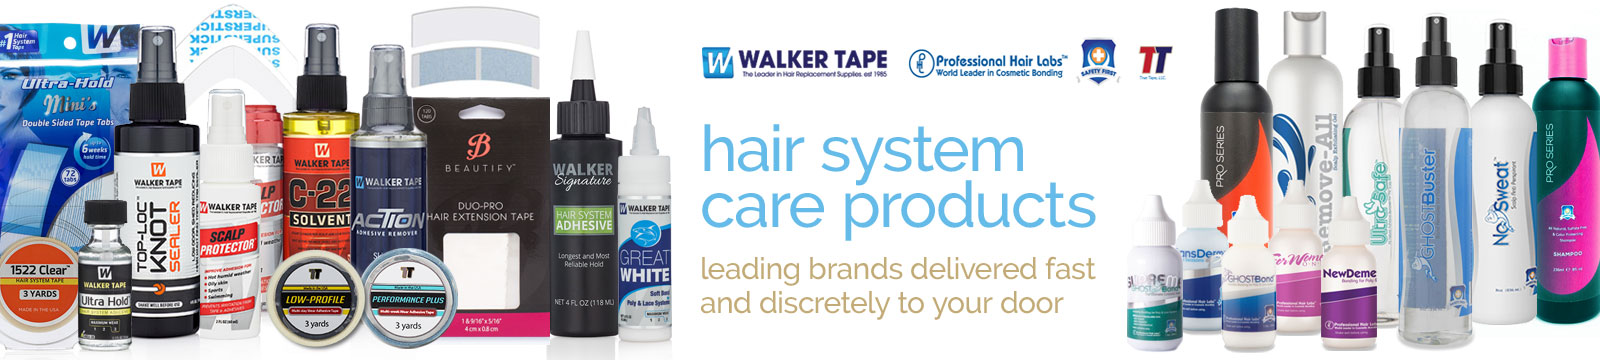 holistique - wig & hair system care products banner